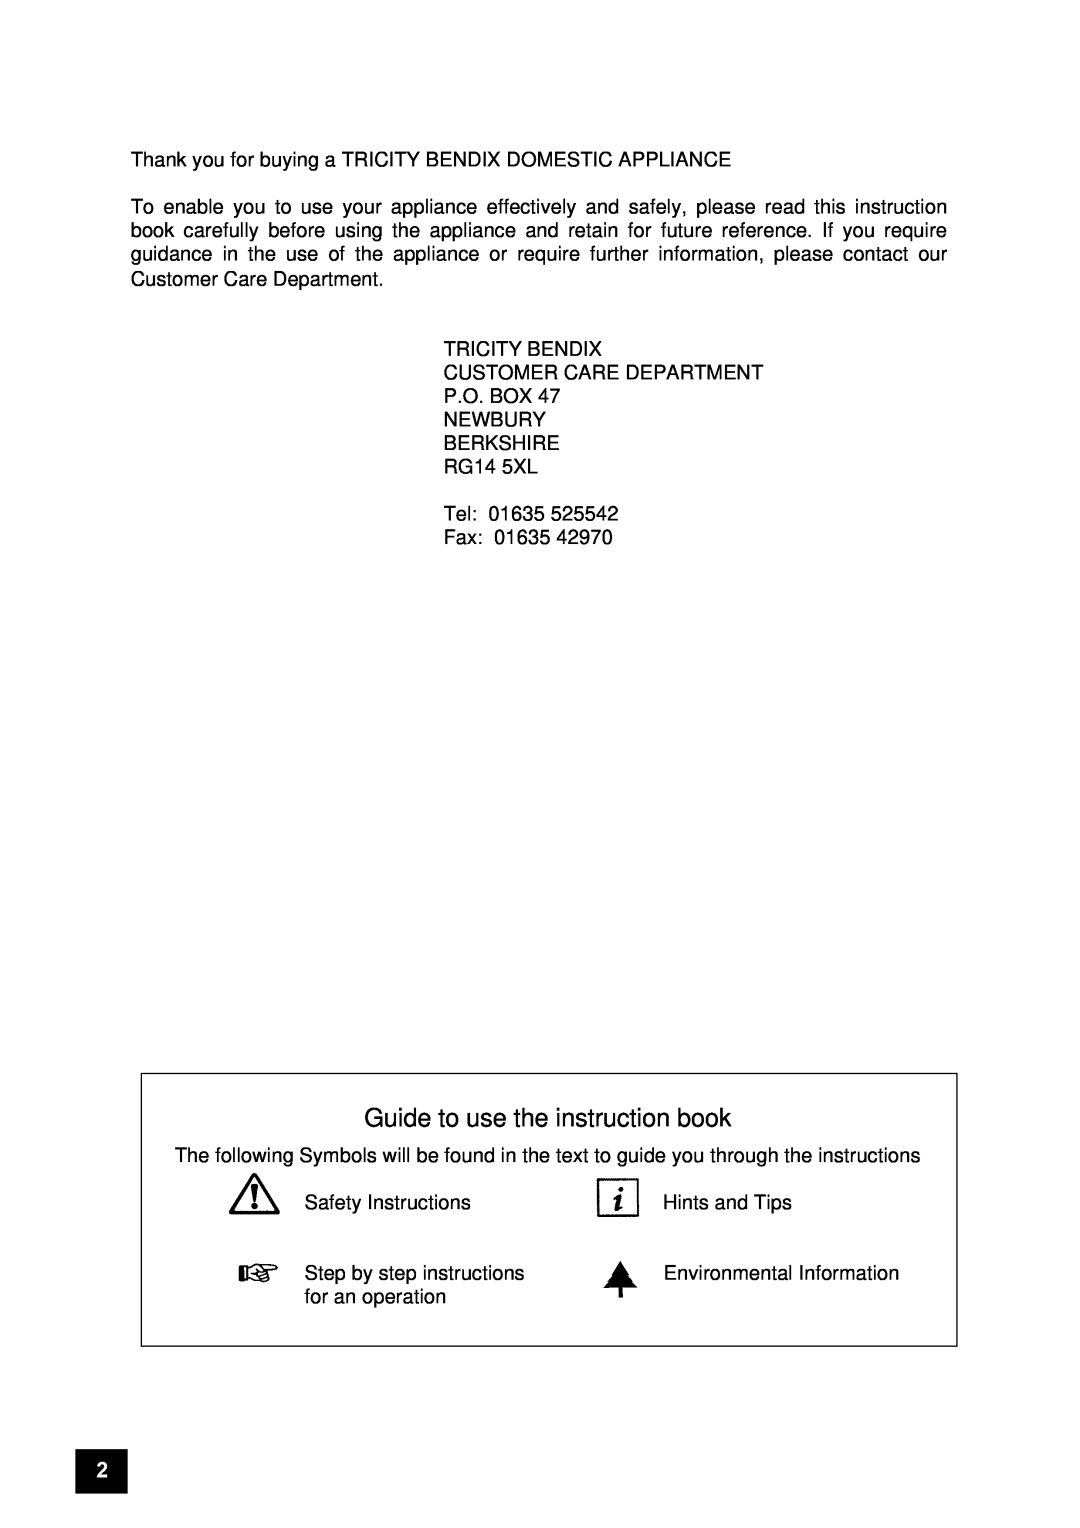 Tricity Bendix FD806W, ECD806 instruction manual Guide to use the instruction book 